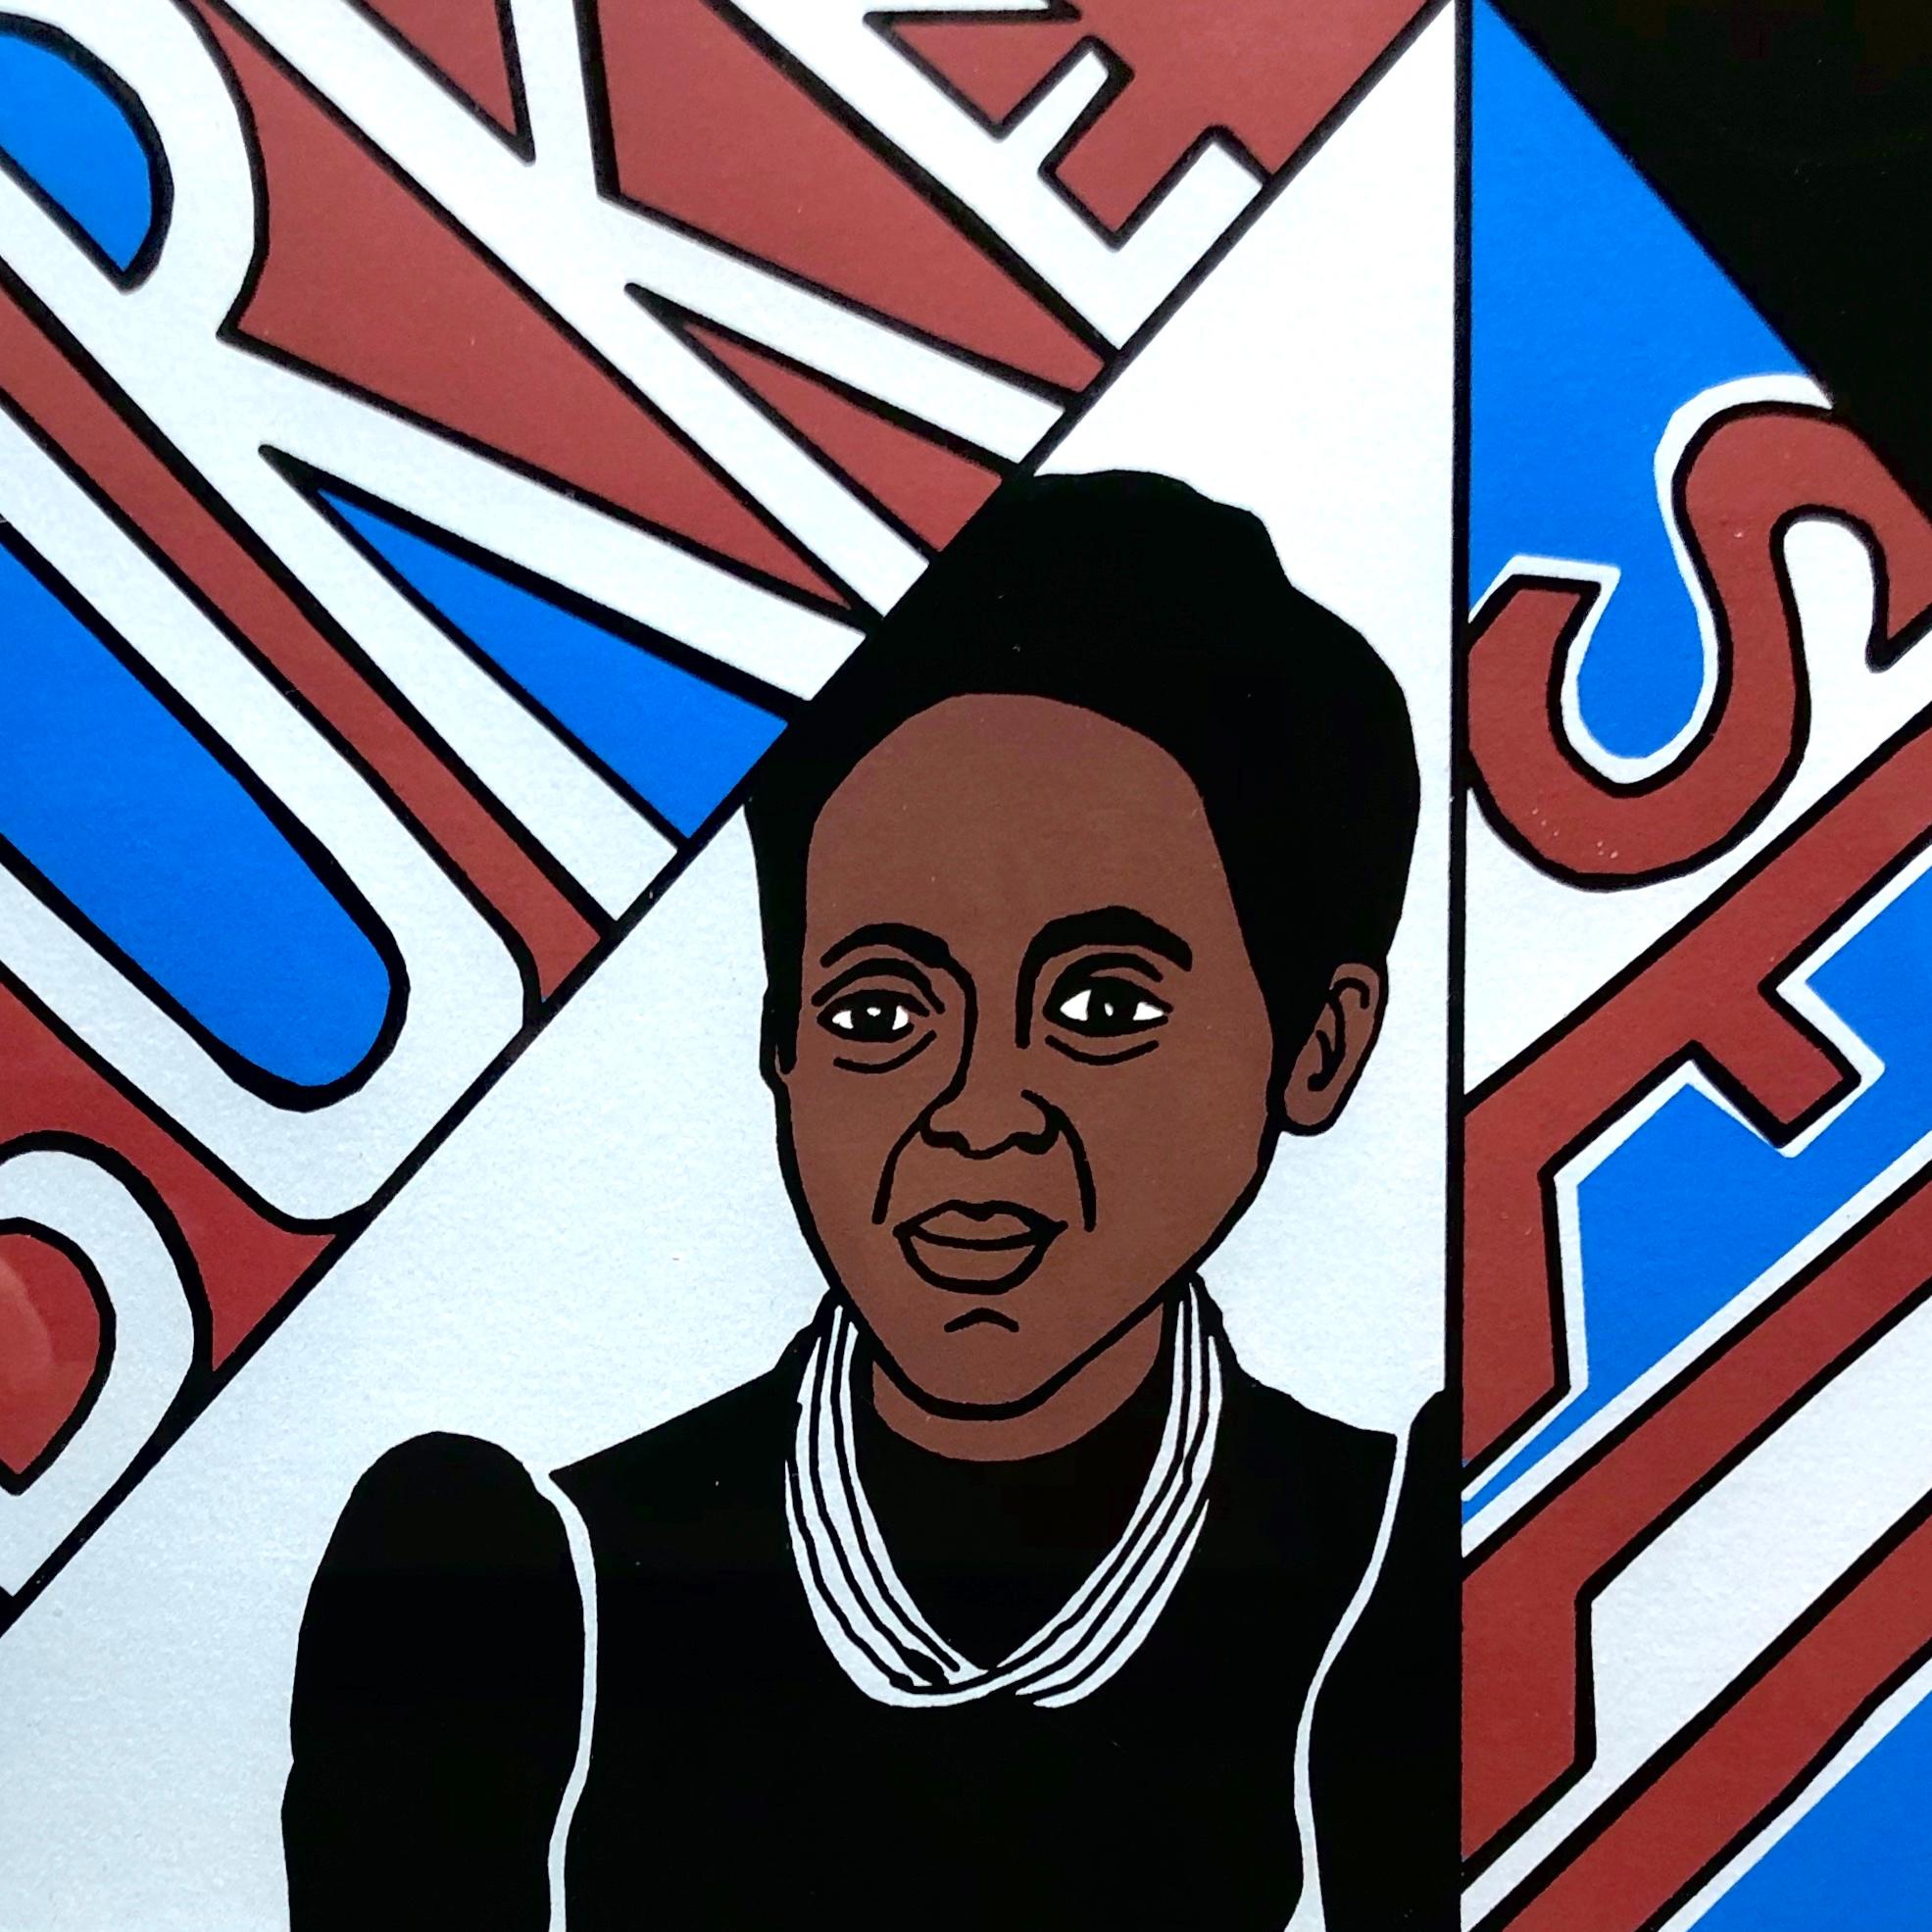 Dear Selma, Every Time I See a Dime, I Think of You - framed print w/ red & blue - Feminist Print by Faith Ringgold